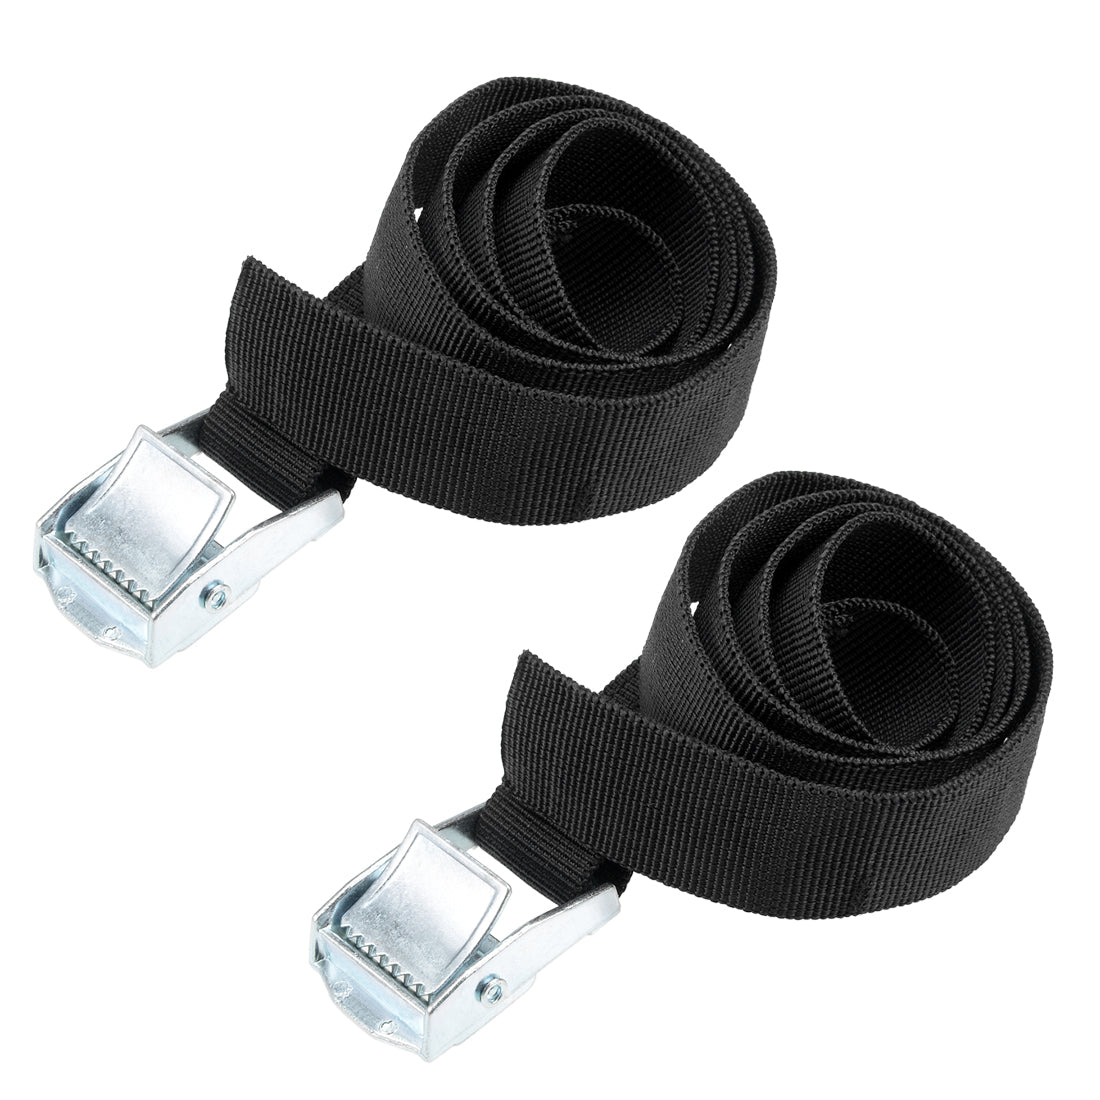 uxcell Uxcell 0.8M x 25mm Lashing Strap Cargo Tie Down StrapsBuckle Up to 80Kg, Black, 2Pcs